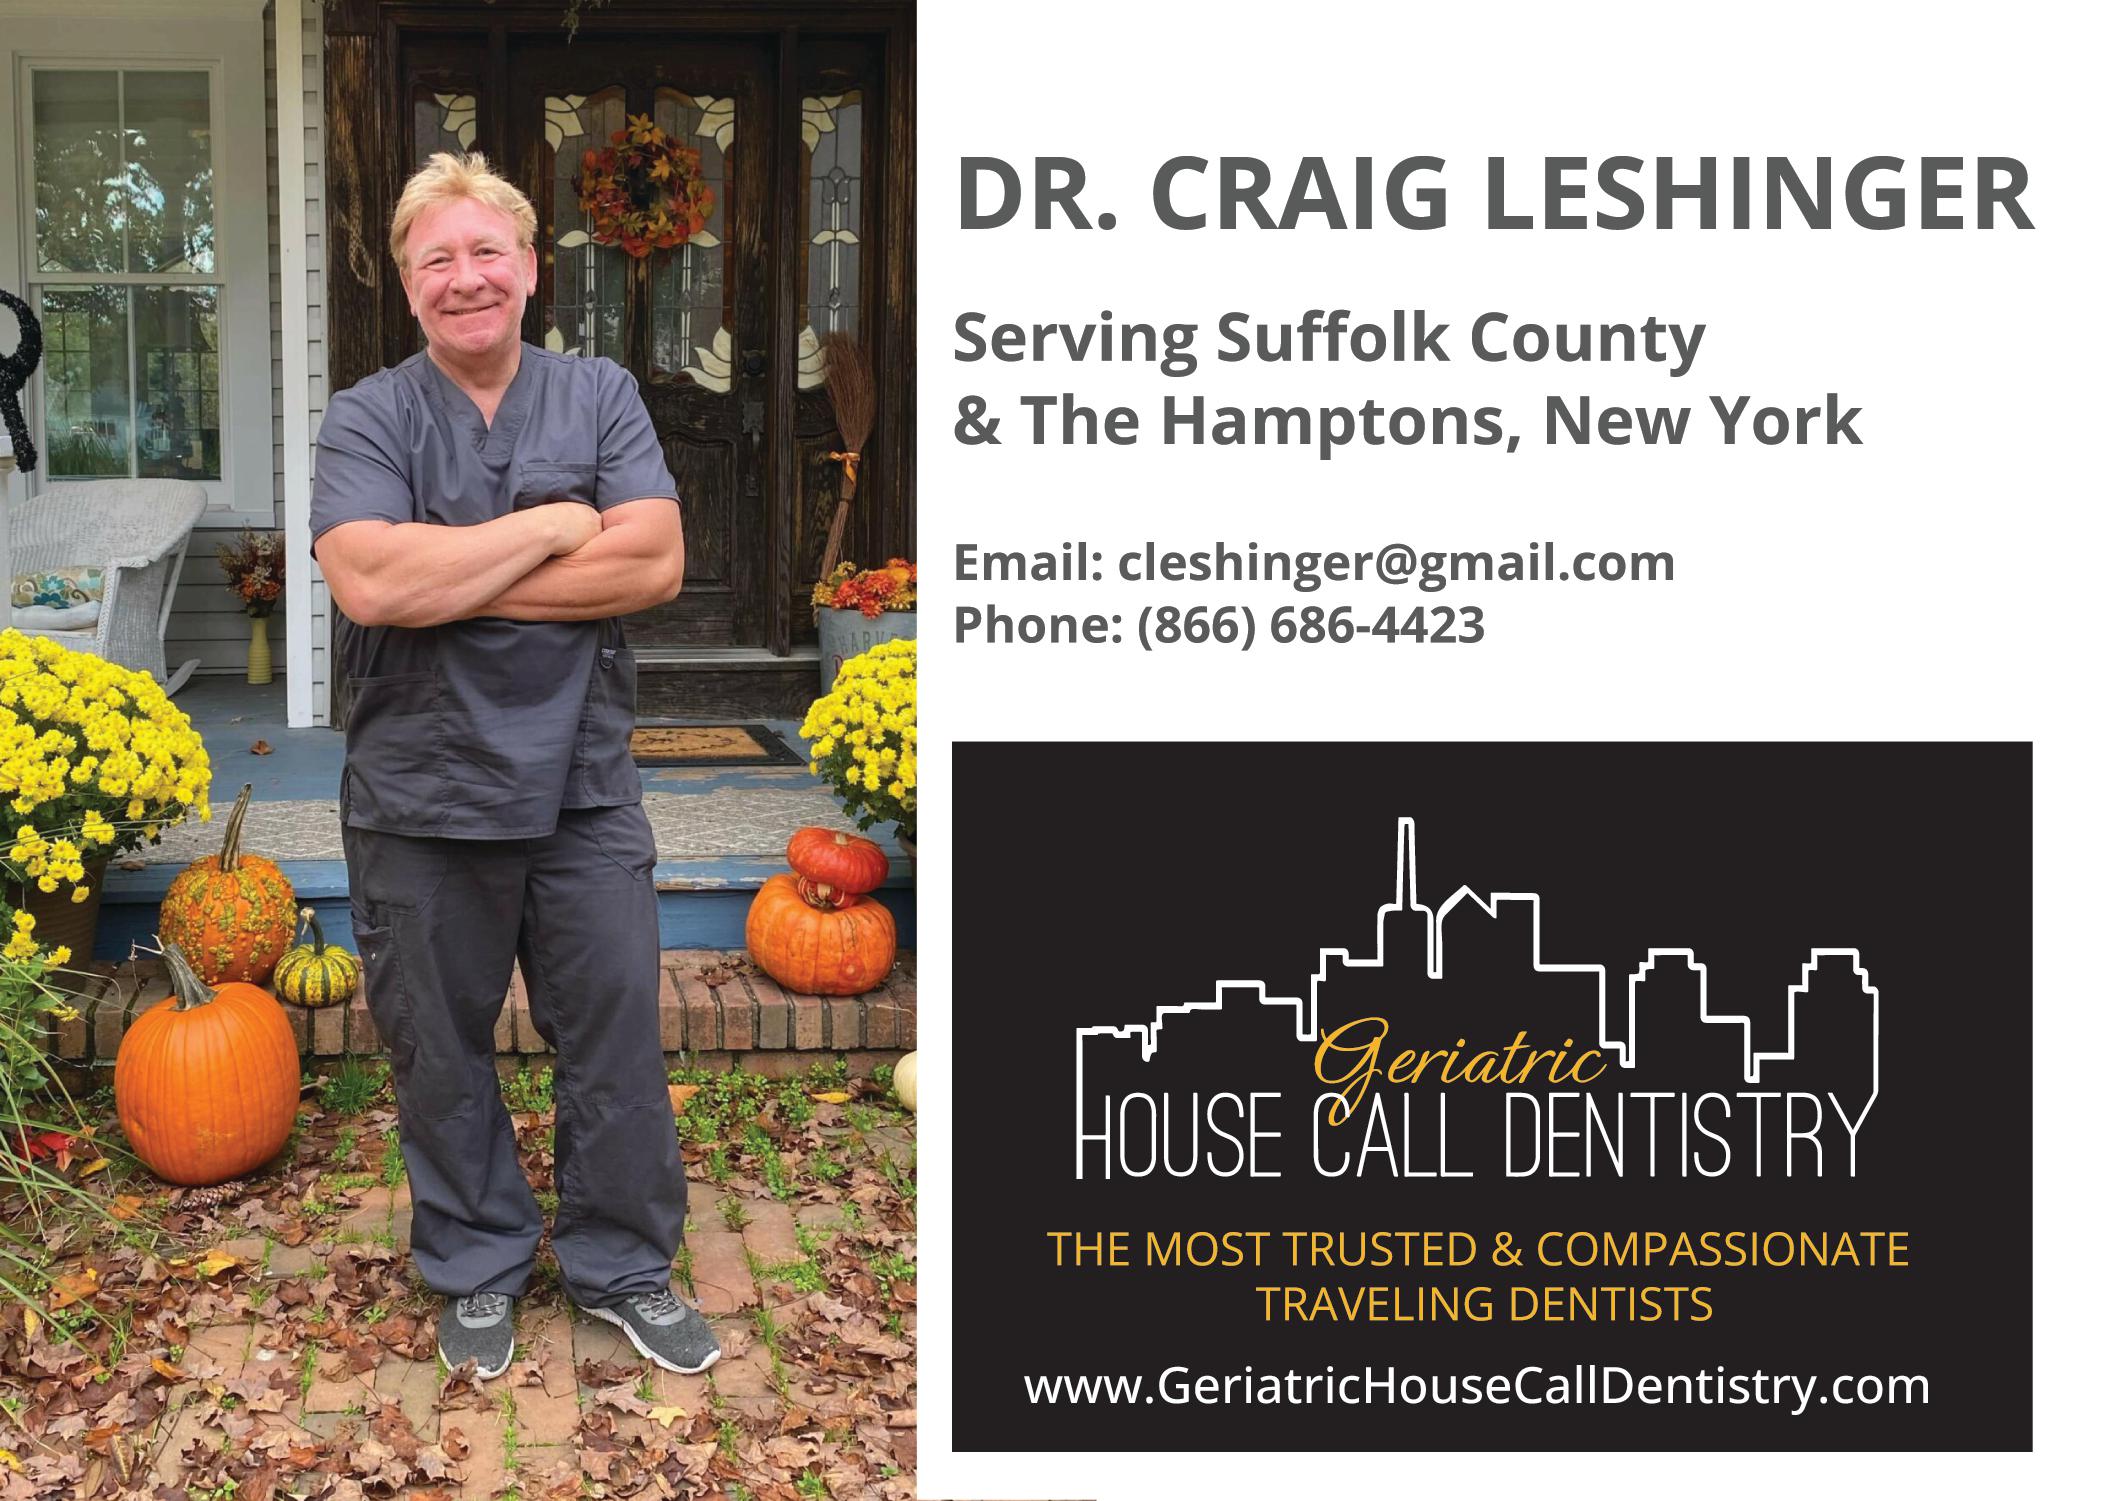 Dr. Craig Leshinger is a lifelong resident of Long Island. He graduated from Dowling College in the spring of 1986, then graduated from Fairleigh Dickinson Dental School in 1990. Upon returning to Long Island, he completed a year-long AEGD residency at Stony Brook University.  

Dr. Leshinger's venture into geriatric patient care started in his own home when a family member became disabled, and due to limited mobility was confined to his house. It was during this instance that he fully realized the necessity of home care dentistry and decided to fulfill that need in his own work. There is no greater joy than treating patients in the comfort of their own homes; their gratitude is immeasurable. 
Dr. Leshinger feels blessed to have the opportunity to take on this work within a new and incredibly important niche in the dental space.